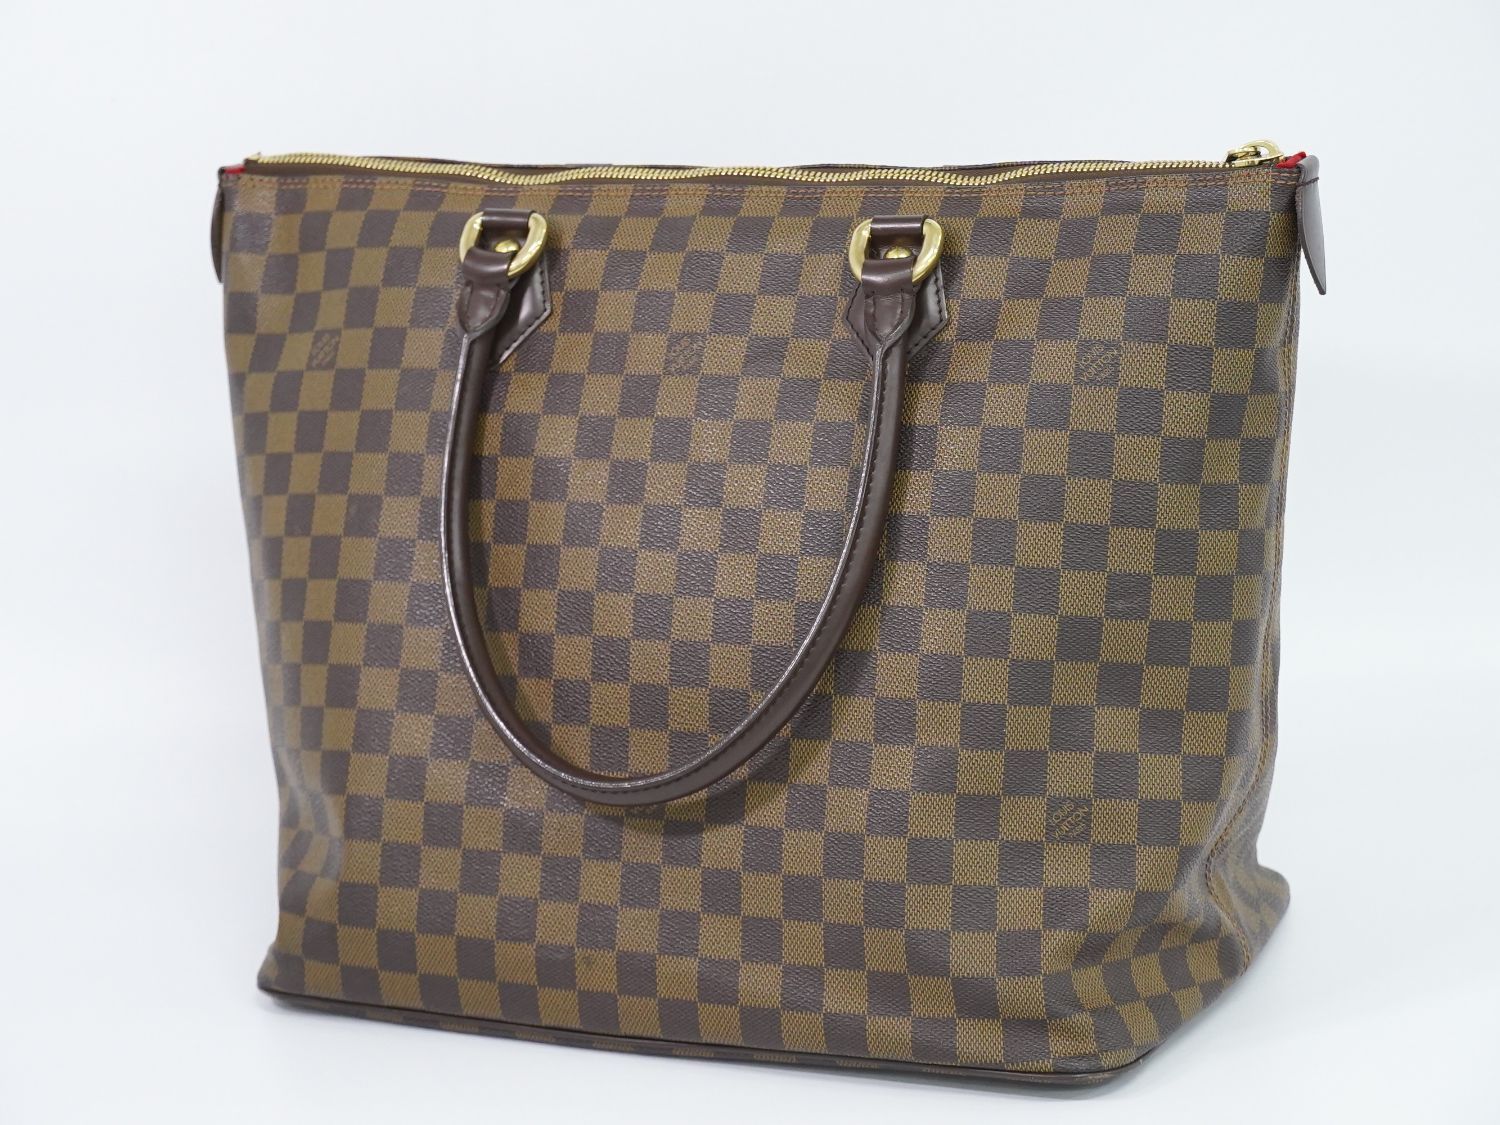 LOUIS VUITTON サレヤGM ダミエ トートバッグ N51181